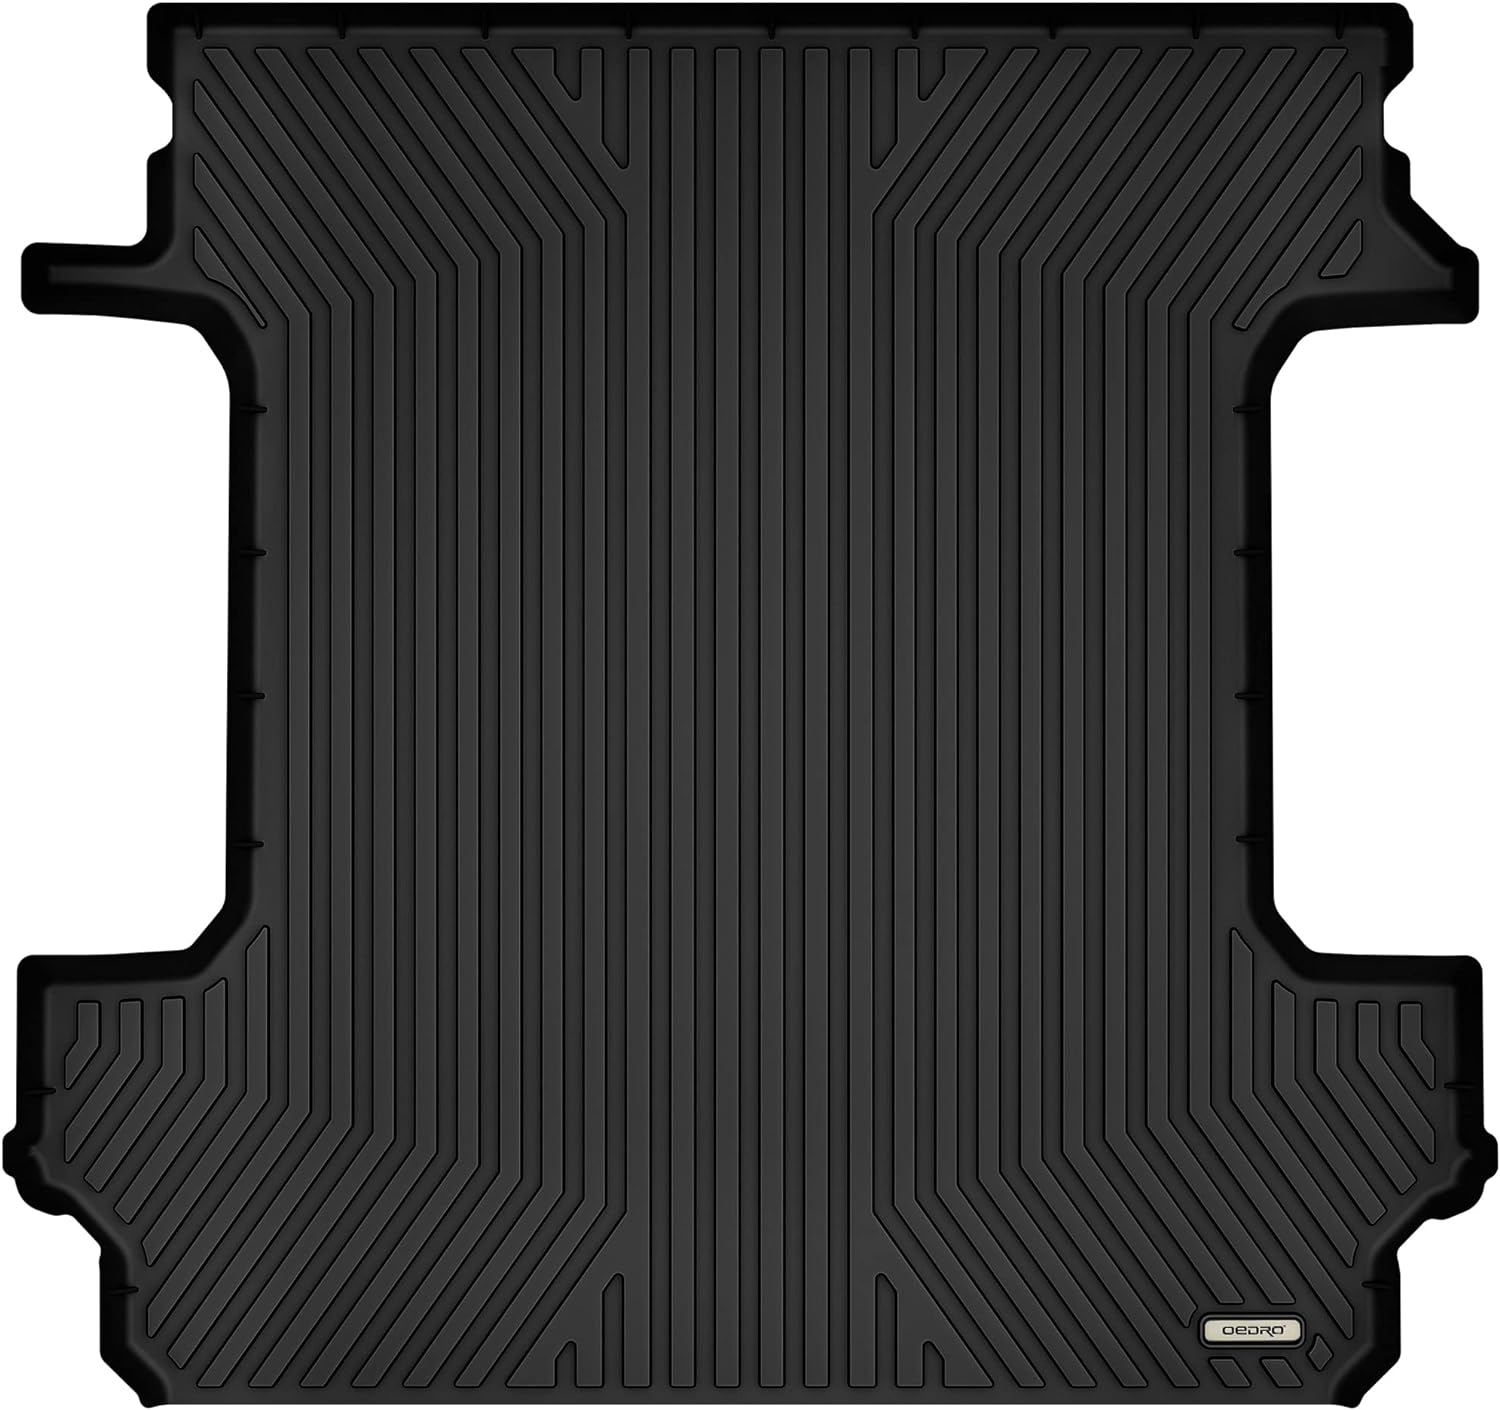 oEdRo Truck Bed Mats Compatible with 2019-2022 Chevy Silverado / GMC Sierra 1500 Crew Cab Short Bed, Custom Fit All-Weather Rubber Tr